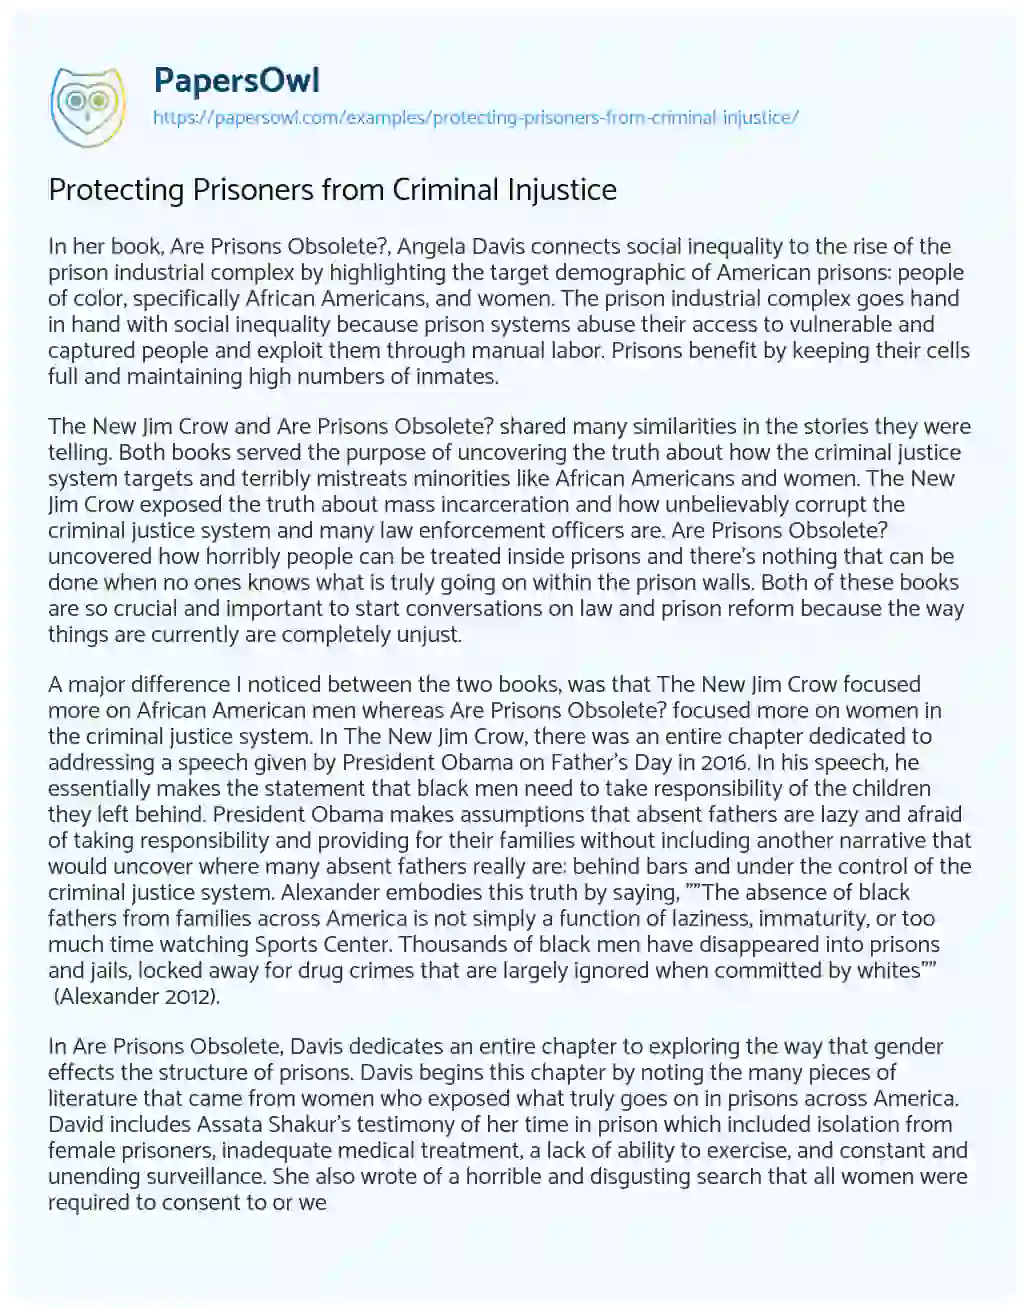 Essay on Protecting Prisoners from Criminal Injustice